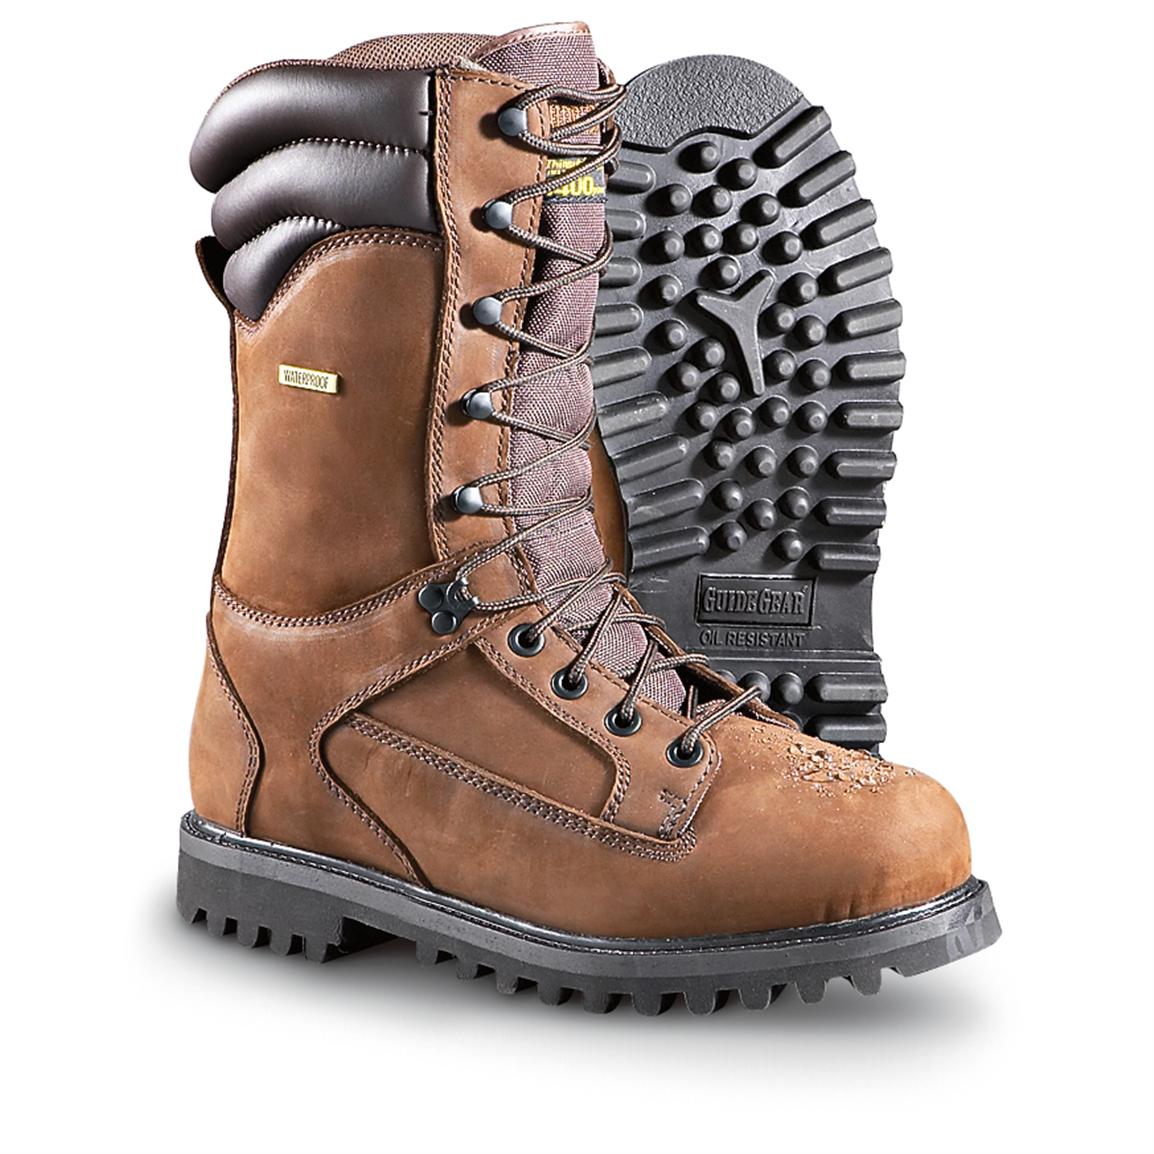 1400 gram thinsulate hunting boots,Save up to 19%,www.ilcascinone.com